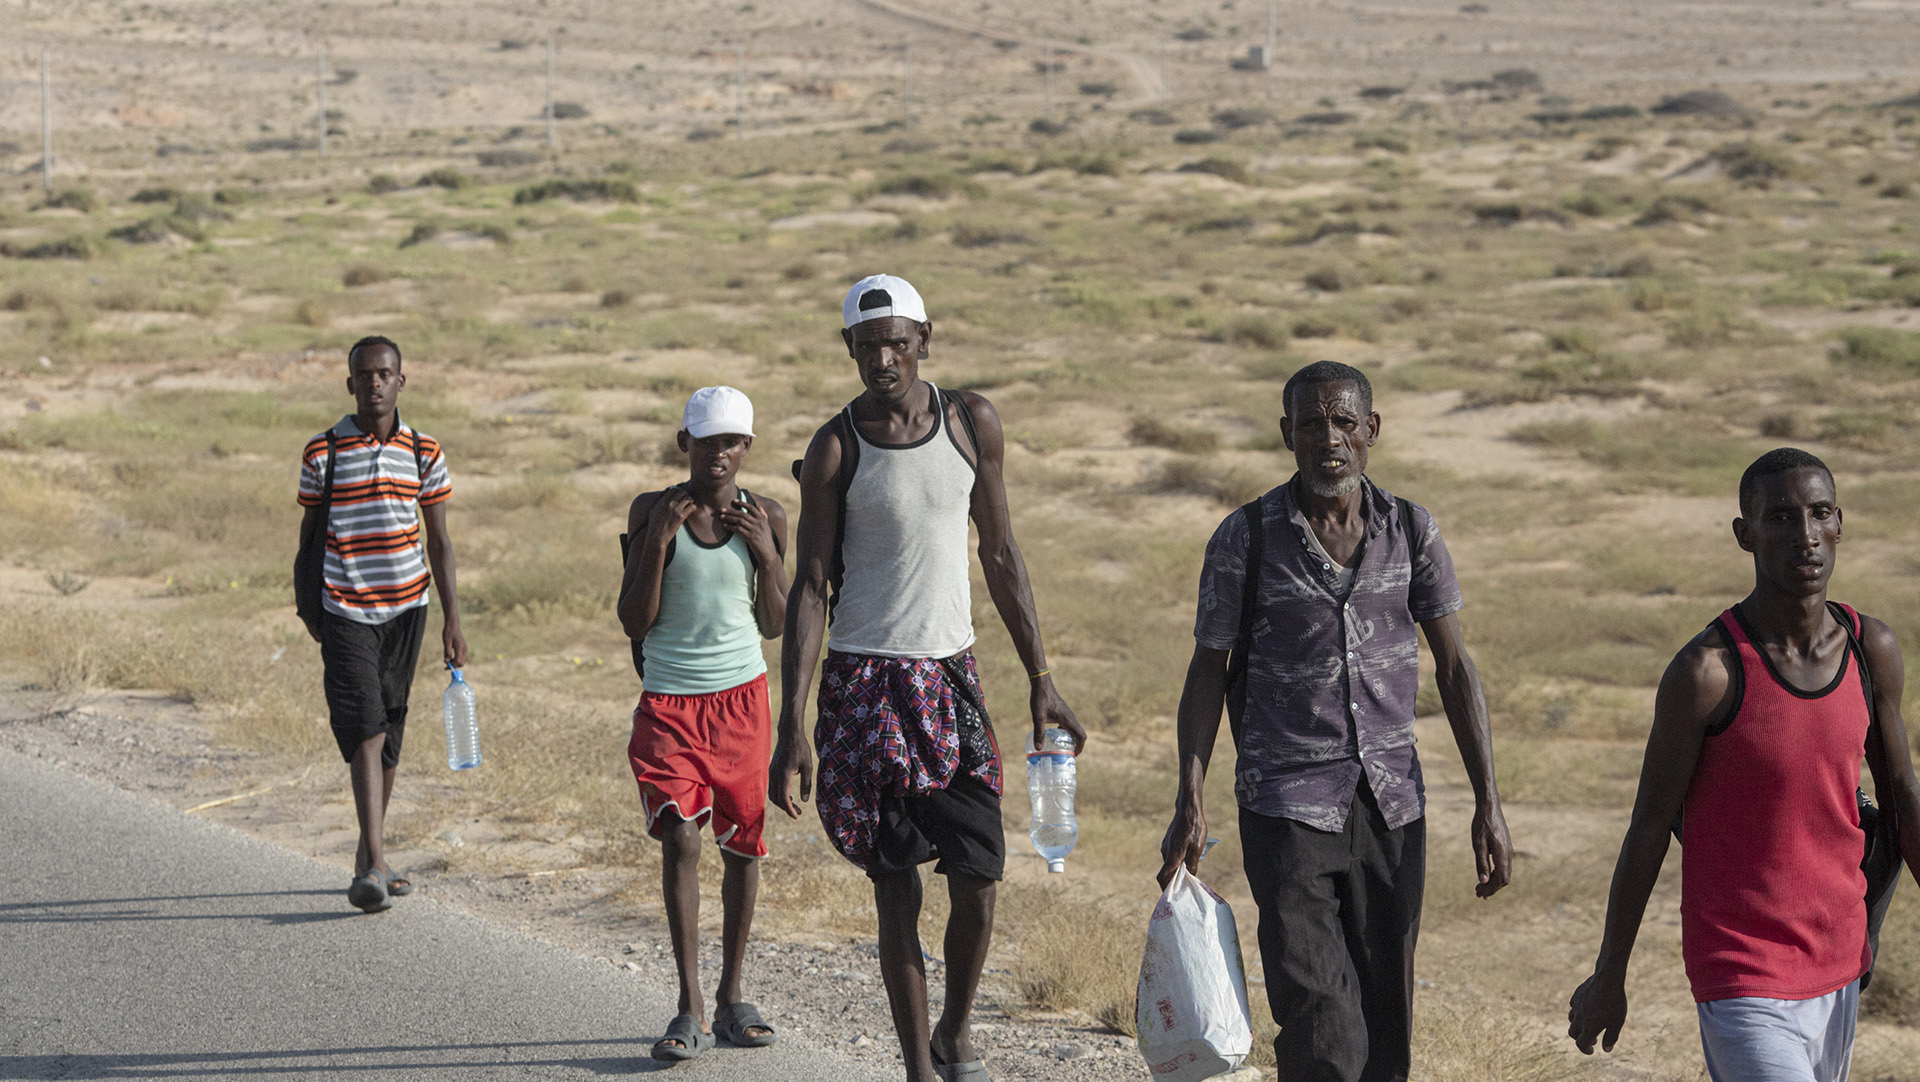 After arriving in Yemen by boat, African migrants take the road inland from the coast to Ataq, in Yemen's southern Shabwa province, 13 November 2020